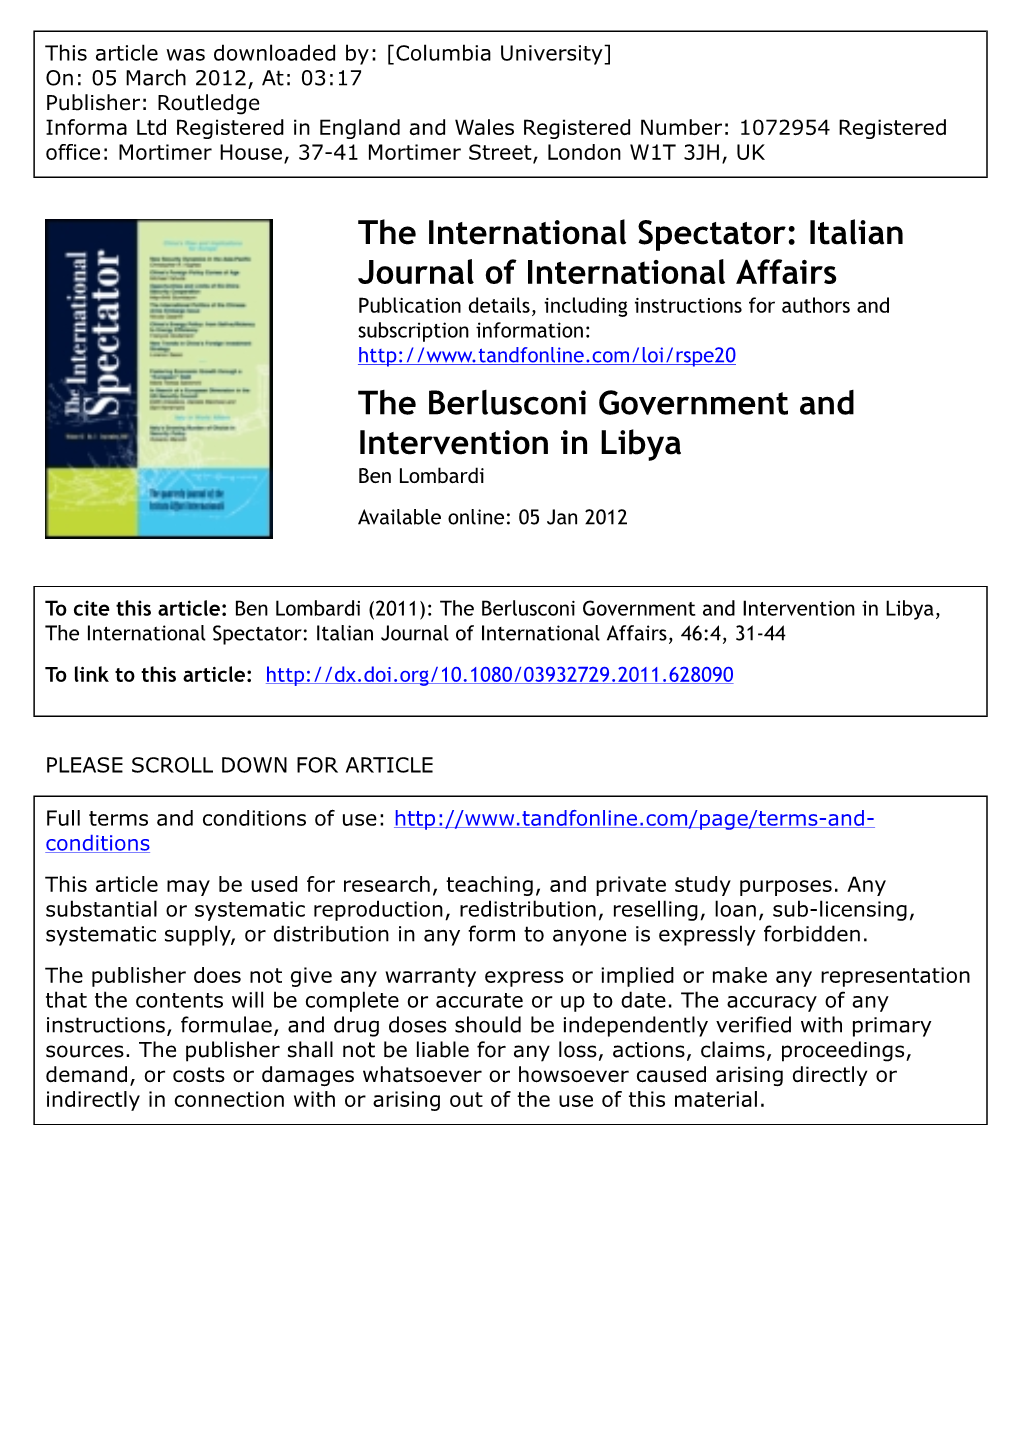 The Berlusconi Government and Intervention in Libya Ben Lombardi Available Online: 05 Jan 2012